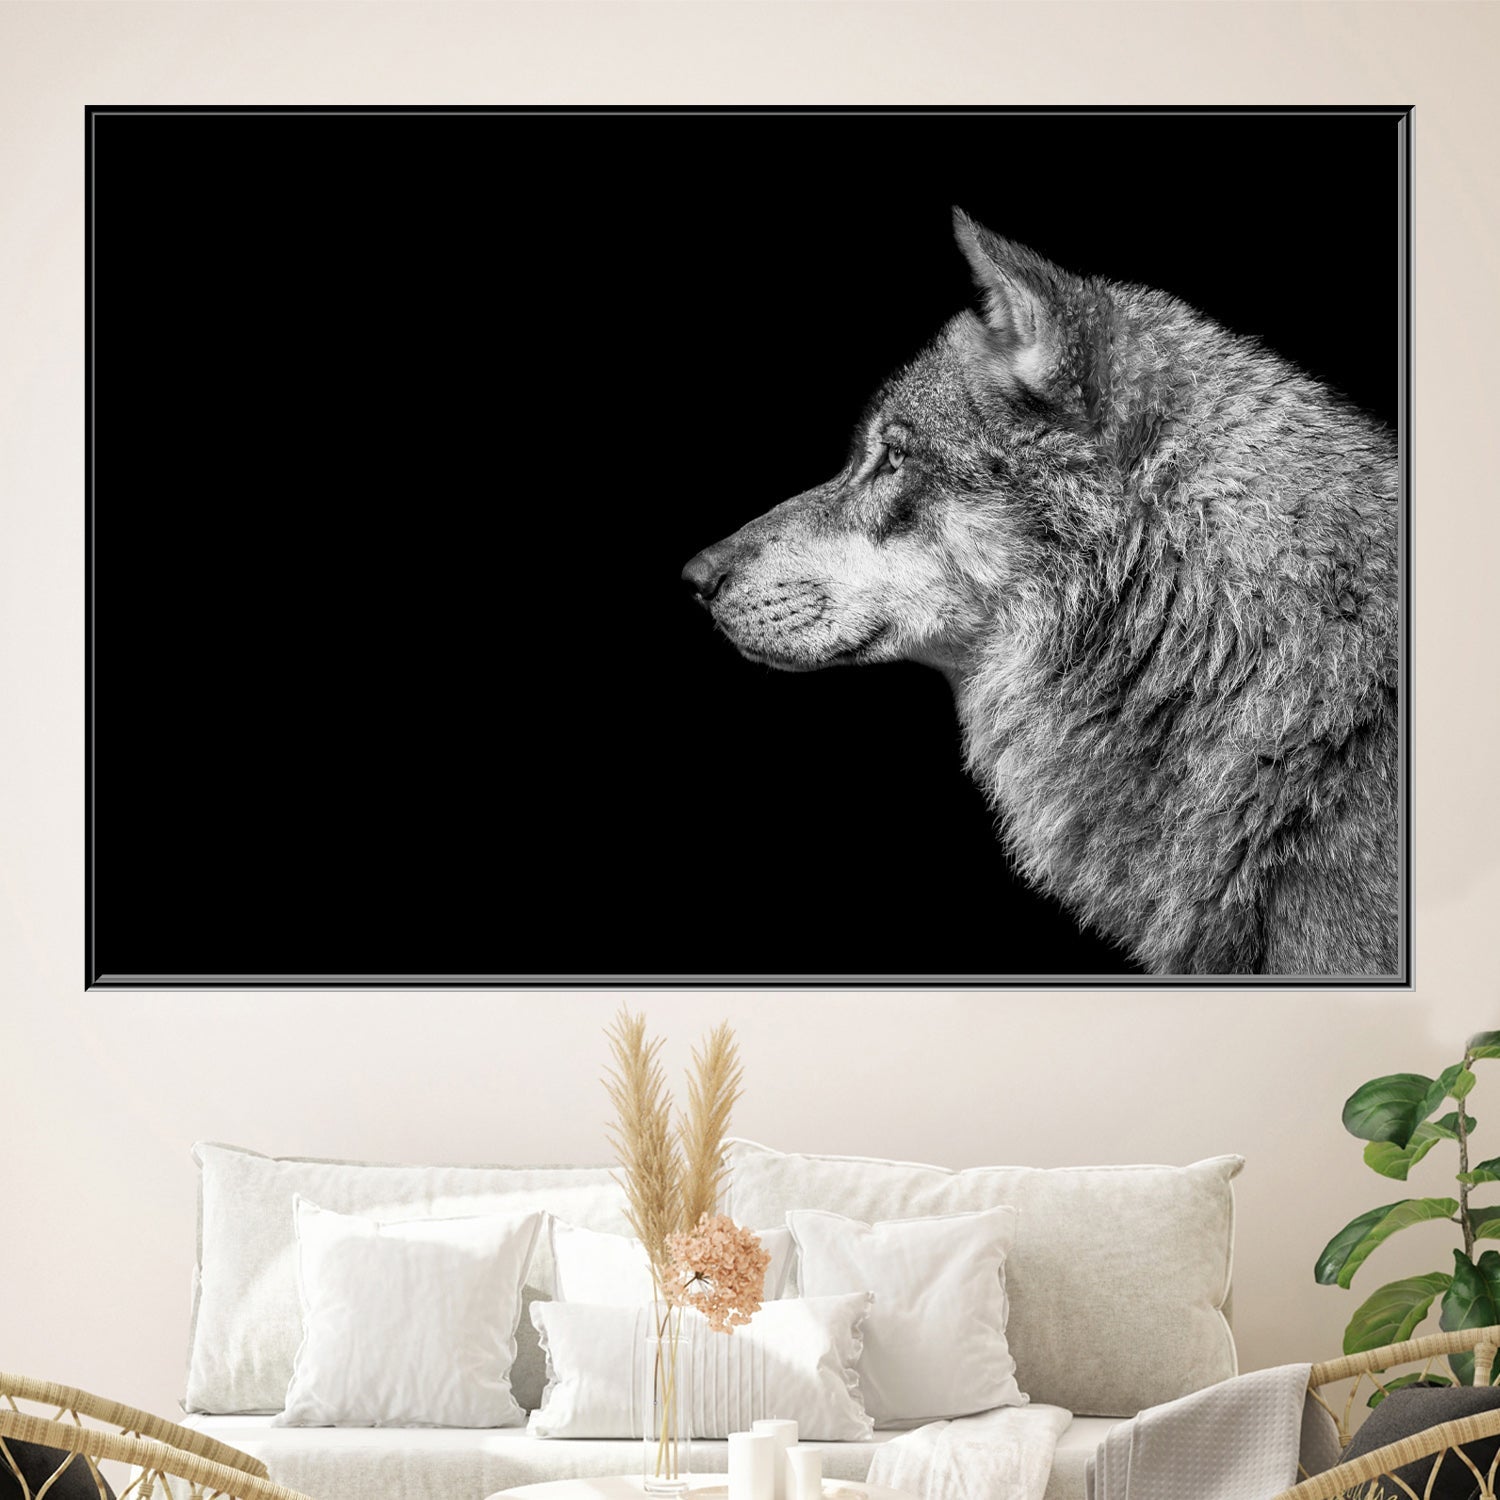 https://cdn.shopify.com/s/files/1/0387/9986/8044/products/WolfSideViewCanvasArtprintStretched-1.jpg